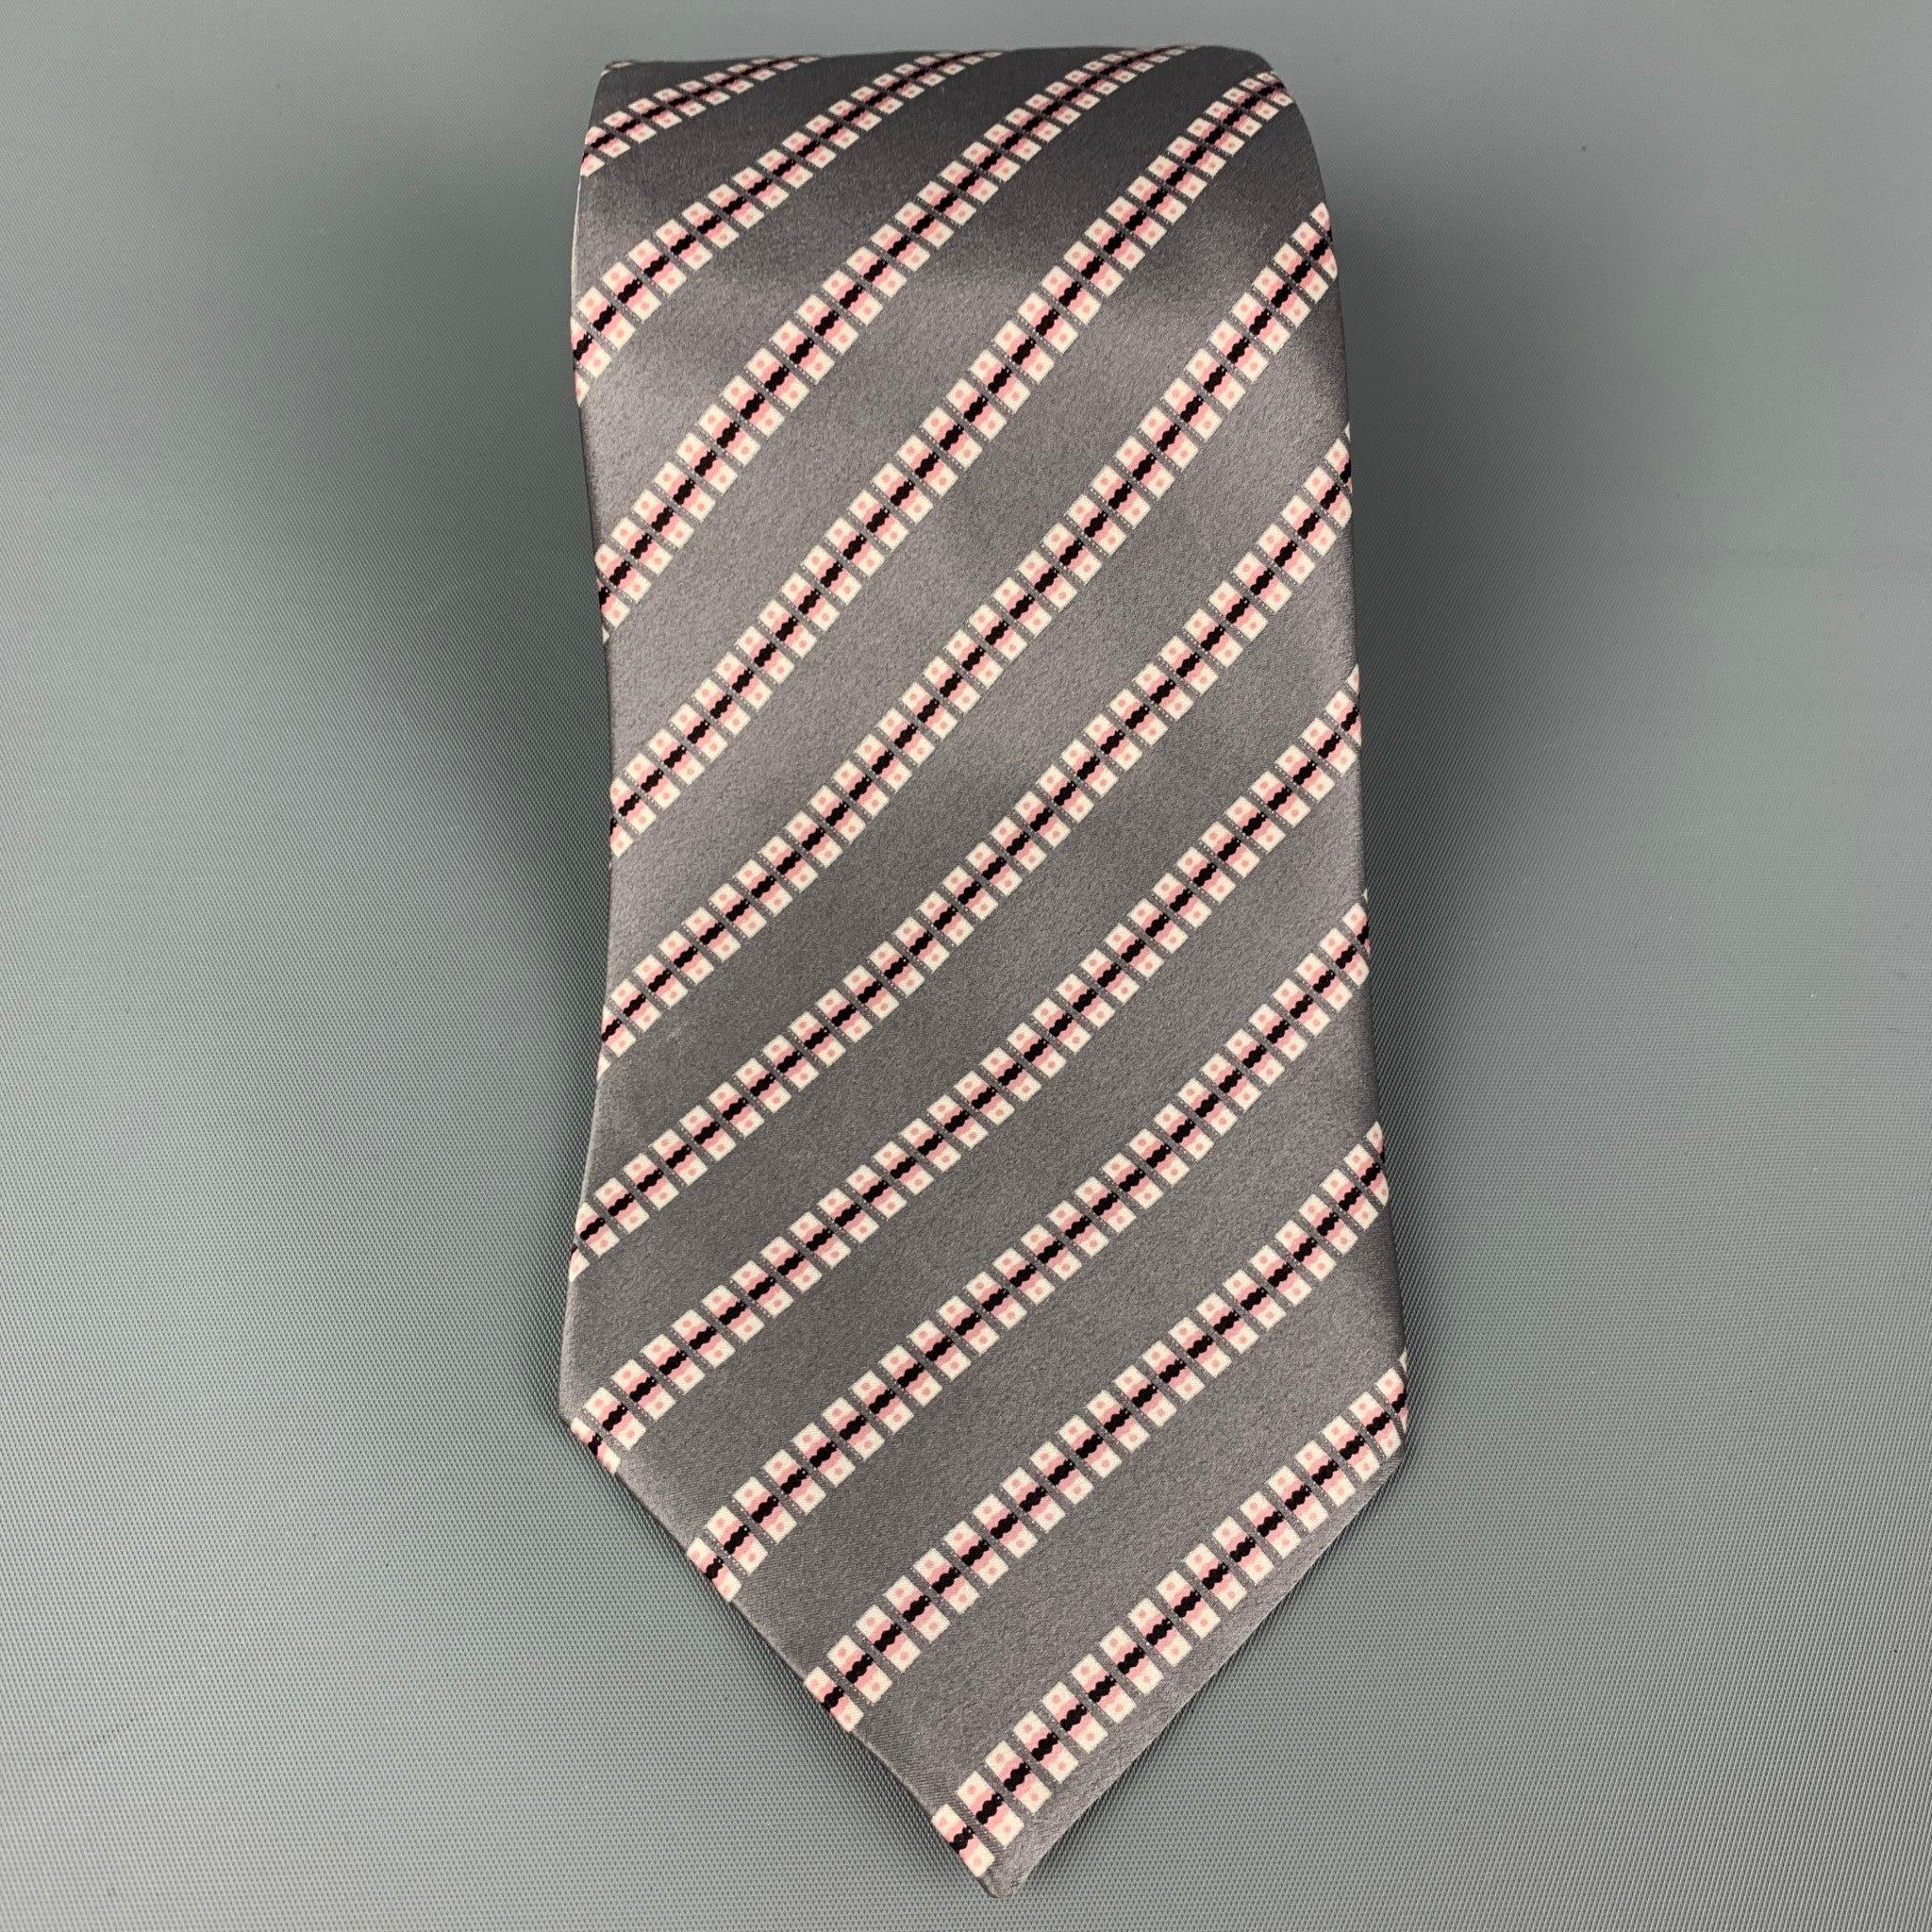 STEFANO RICCI necktie comes in a grey & white satin silk with a all over square print. Made in Italy.
Very Good Pre-Owned Condition.Width:
3.75 inches 
  
  
 
Reference: 117131
Category: Tie
More Details
    
Brand:  STEFANO RICCI
Color: 